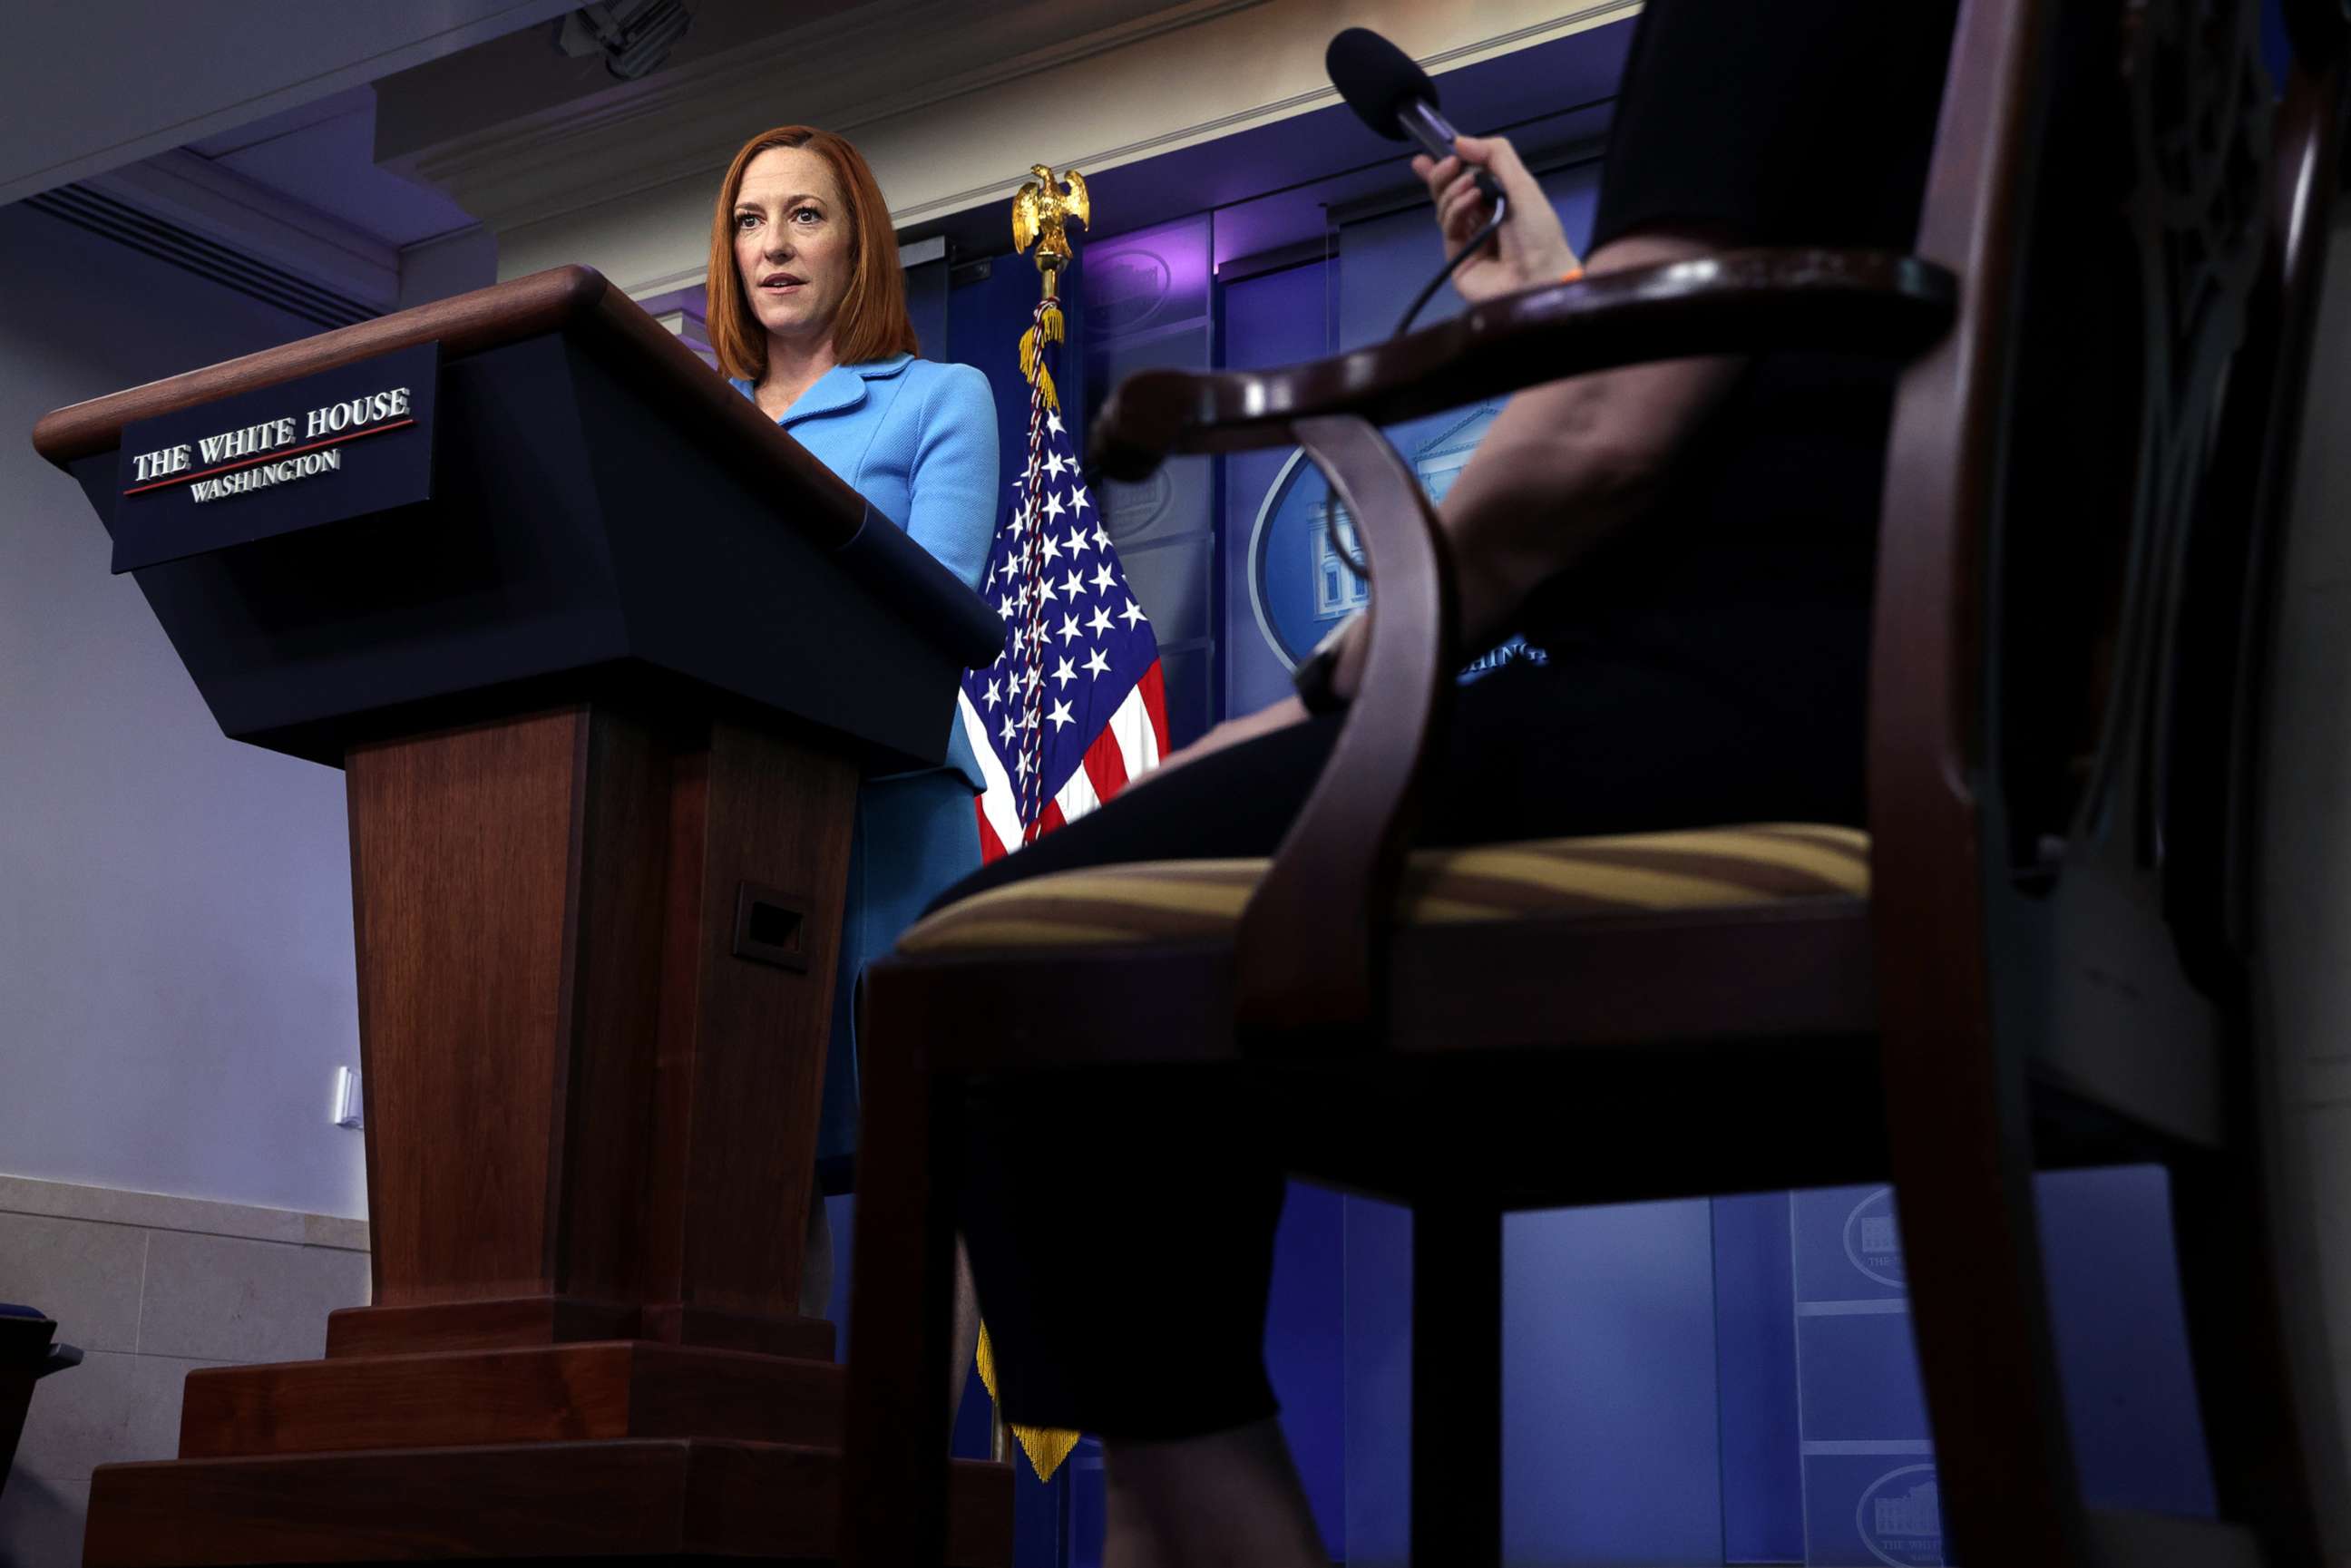 PHOTO: White House Press Secretary Jen Psaki speaks during a daily press briefing in the James Brady Press Briefing Room at the White House, June 2, 2021, in Washington, D.C.